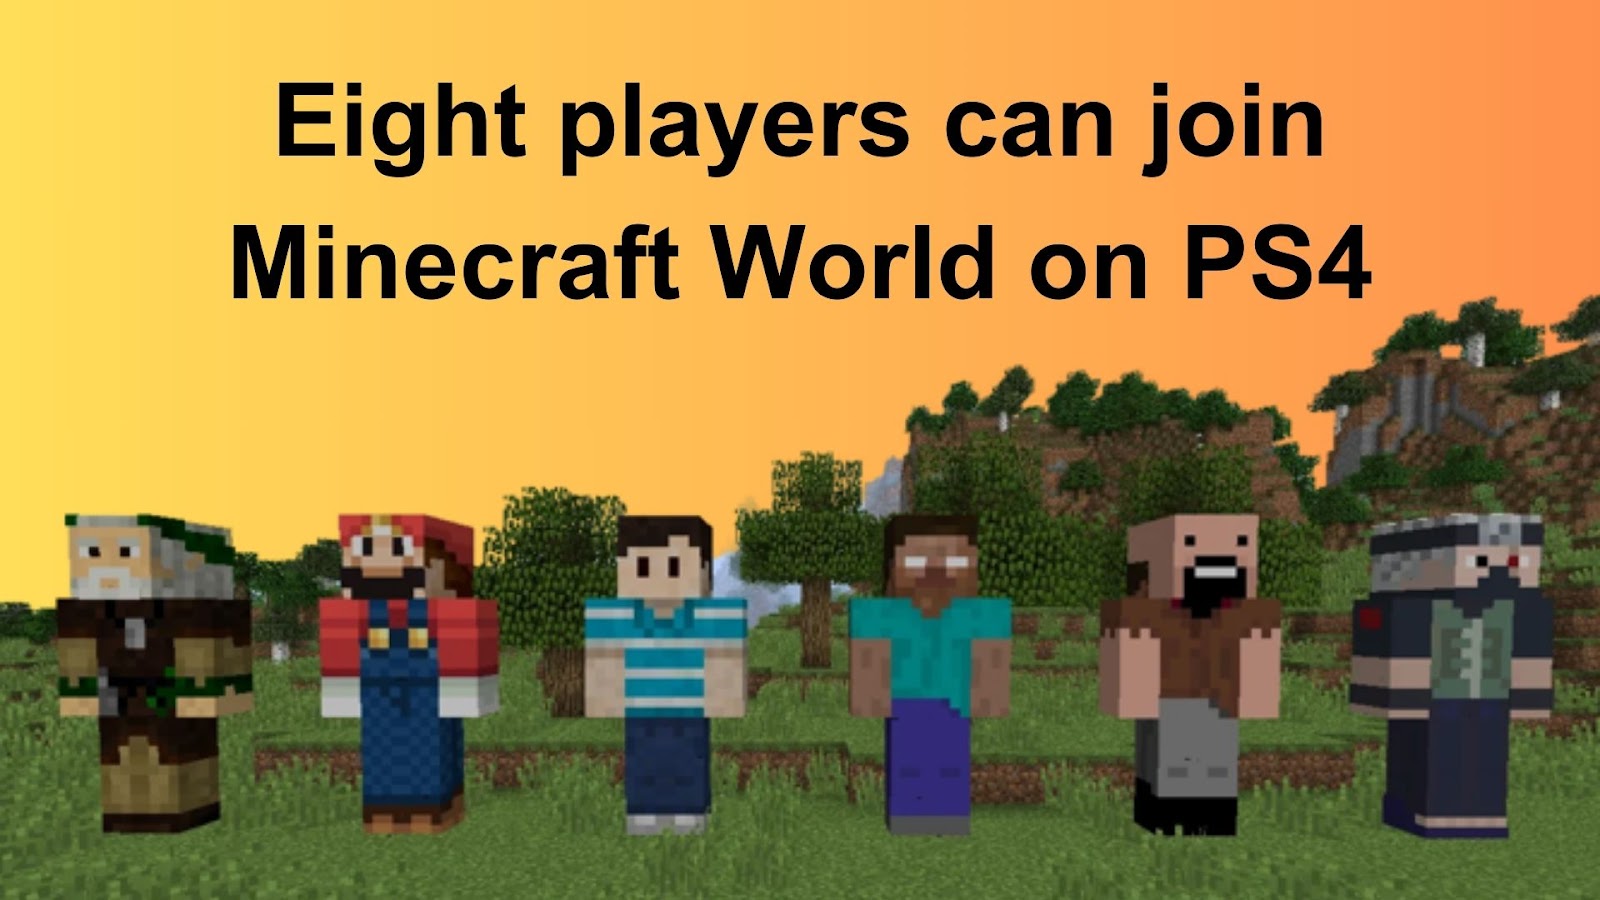 How Many Players Can Join Minecraft World on PS4